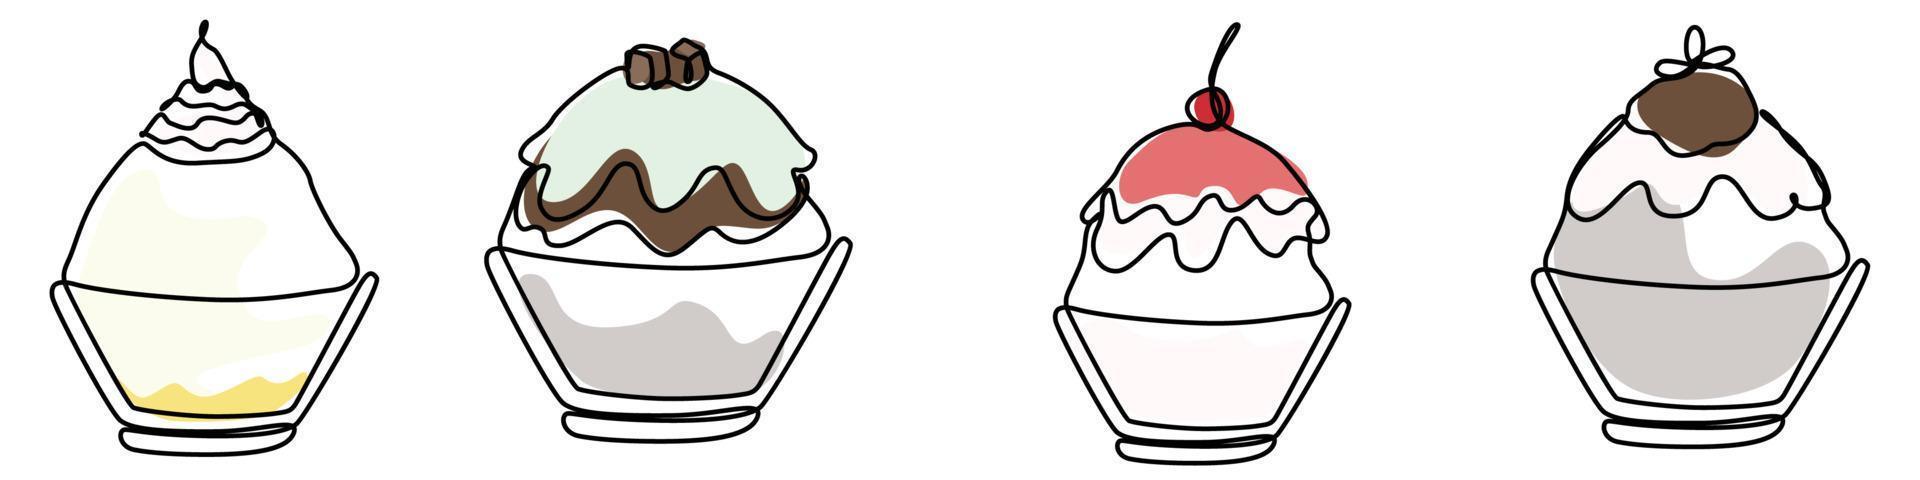 ice shaved bingsu korean japanese style sweet dessert in minimal one continuous line simple design style vector